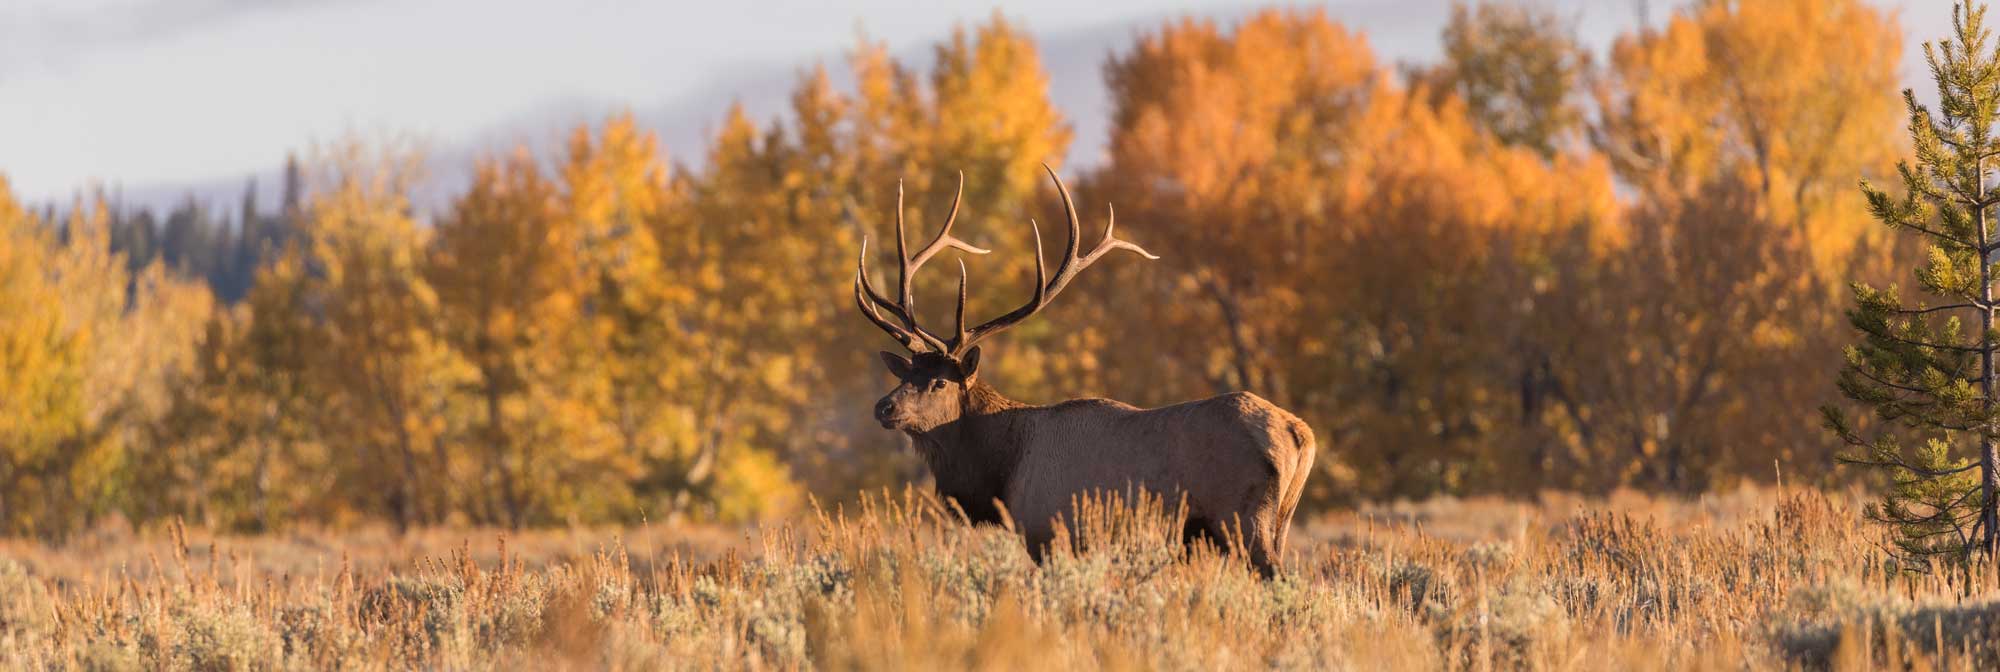 The Best Things To Do In Bozeman In The Fall - Visit Yellowstone